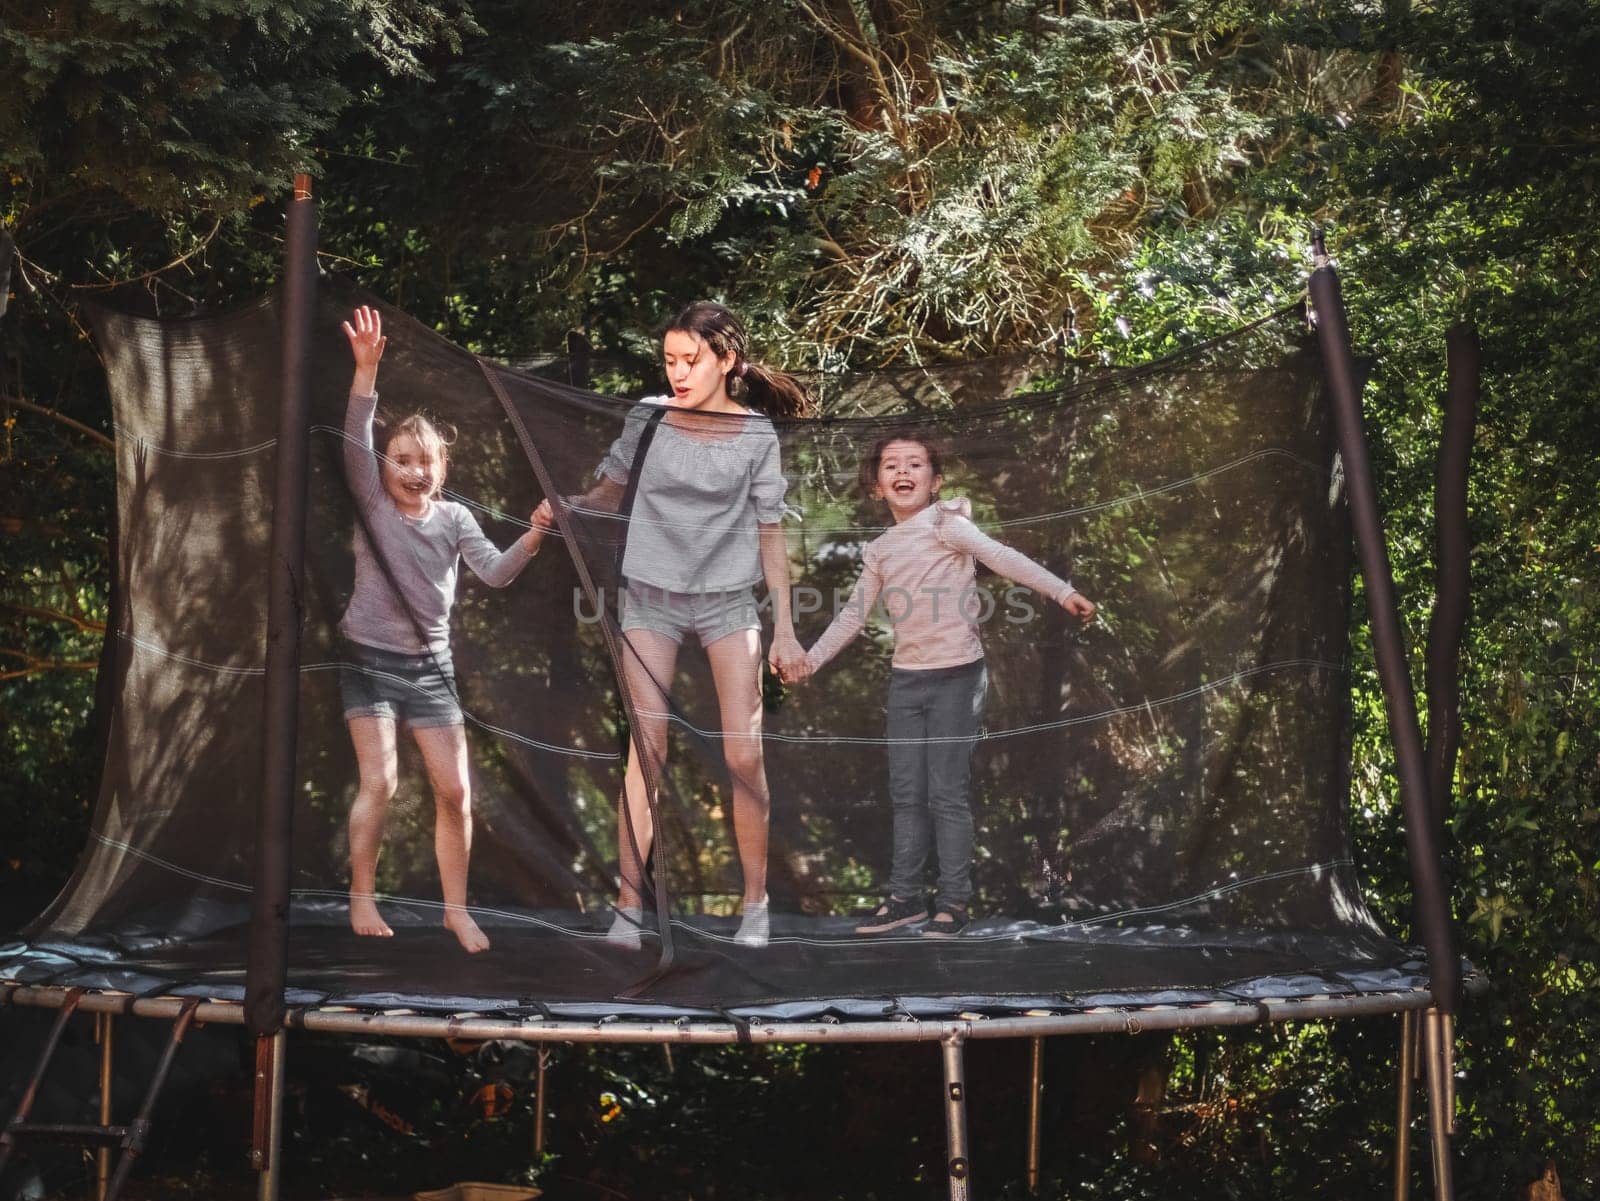 Three beautiful caucasian sister girls in jeans, shorts and a sleeved t-shirt jump on a trampoline, frozen in happy with smiles on their faces in flight in the garden of a house among trees, close-up side view. Concept at home, home sports, happy childhood, children entertainment.